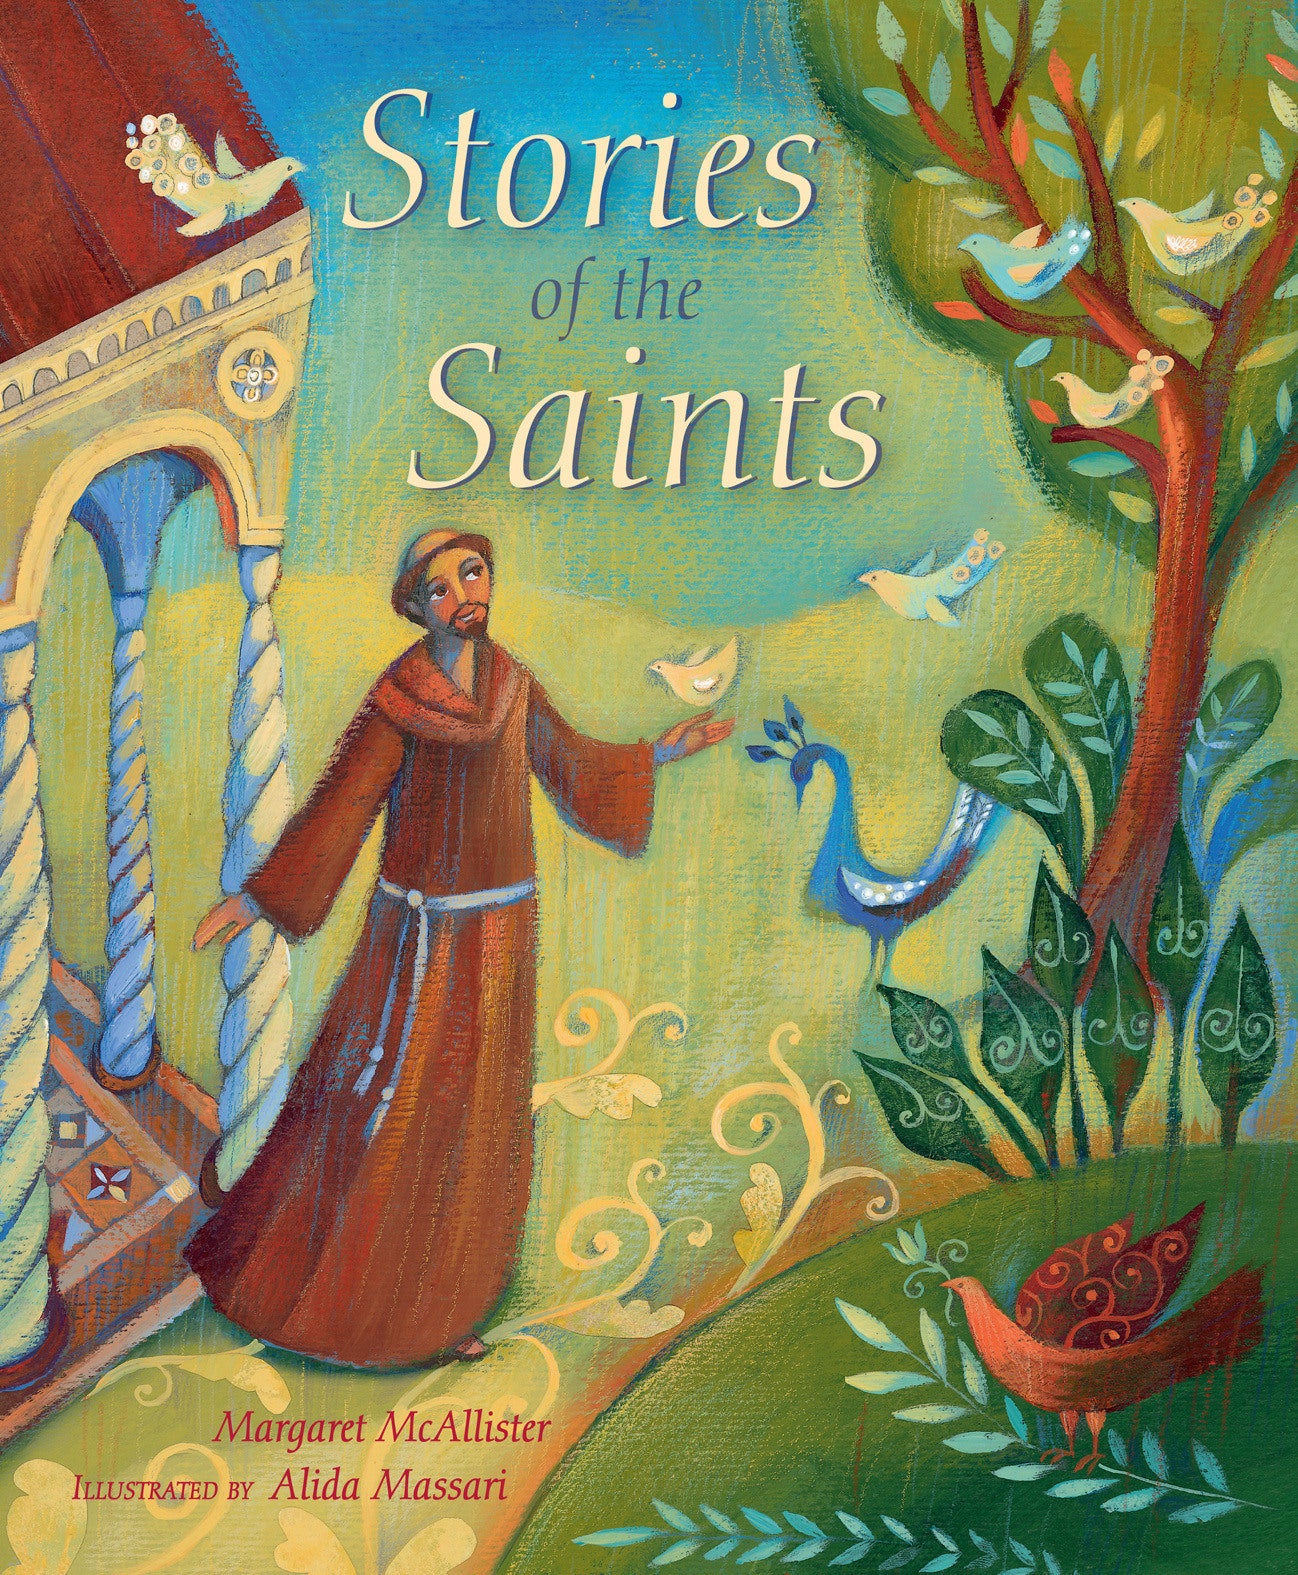 Image of Stories of the Saints other